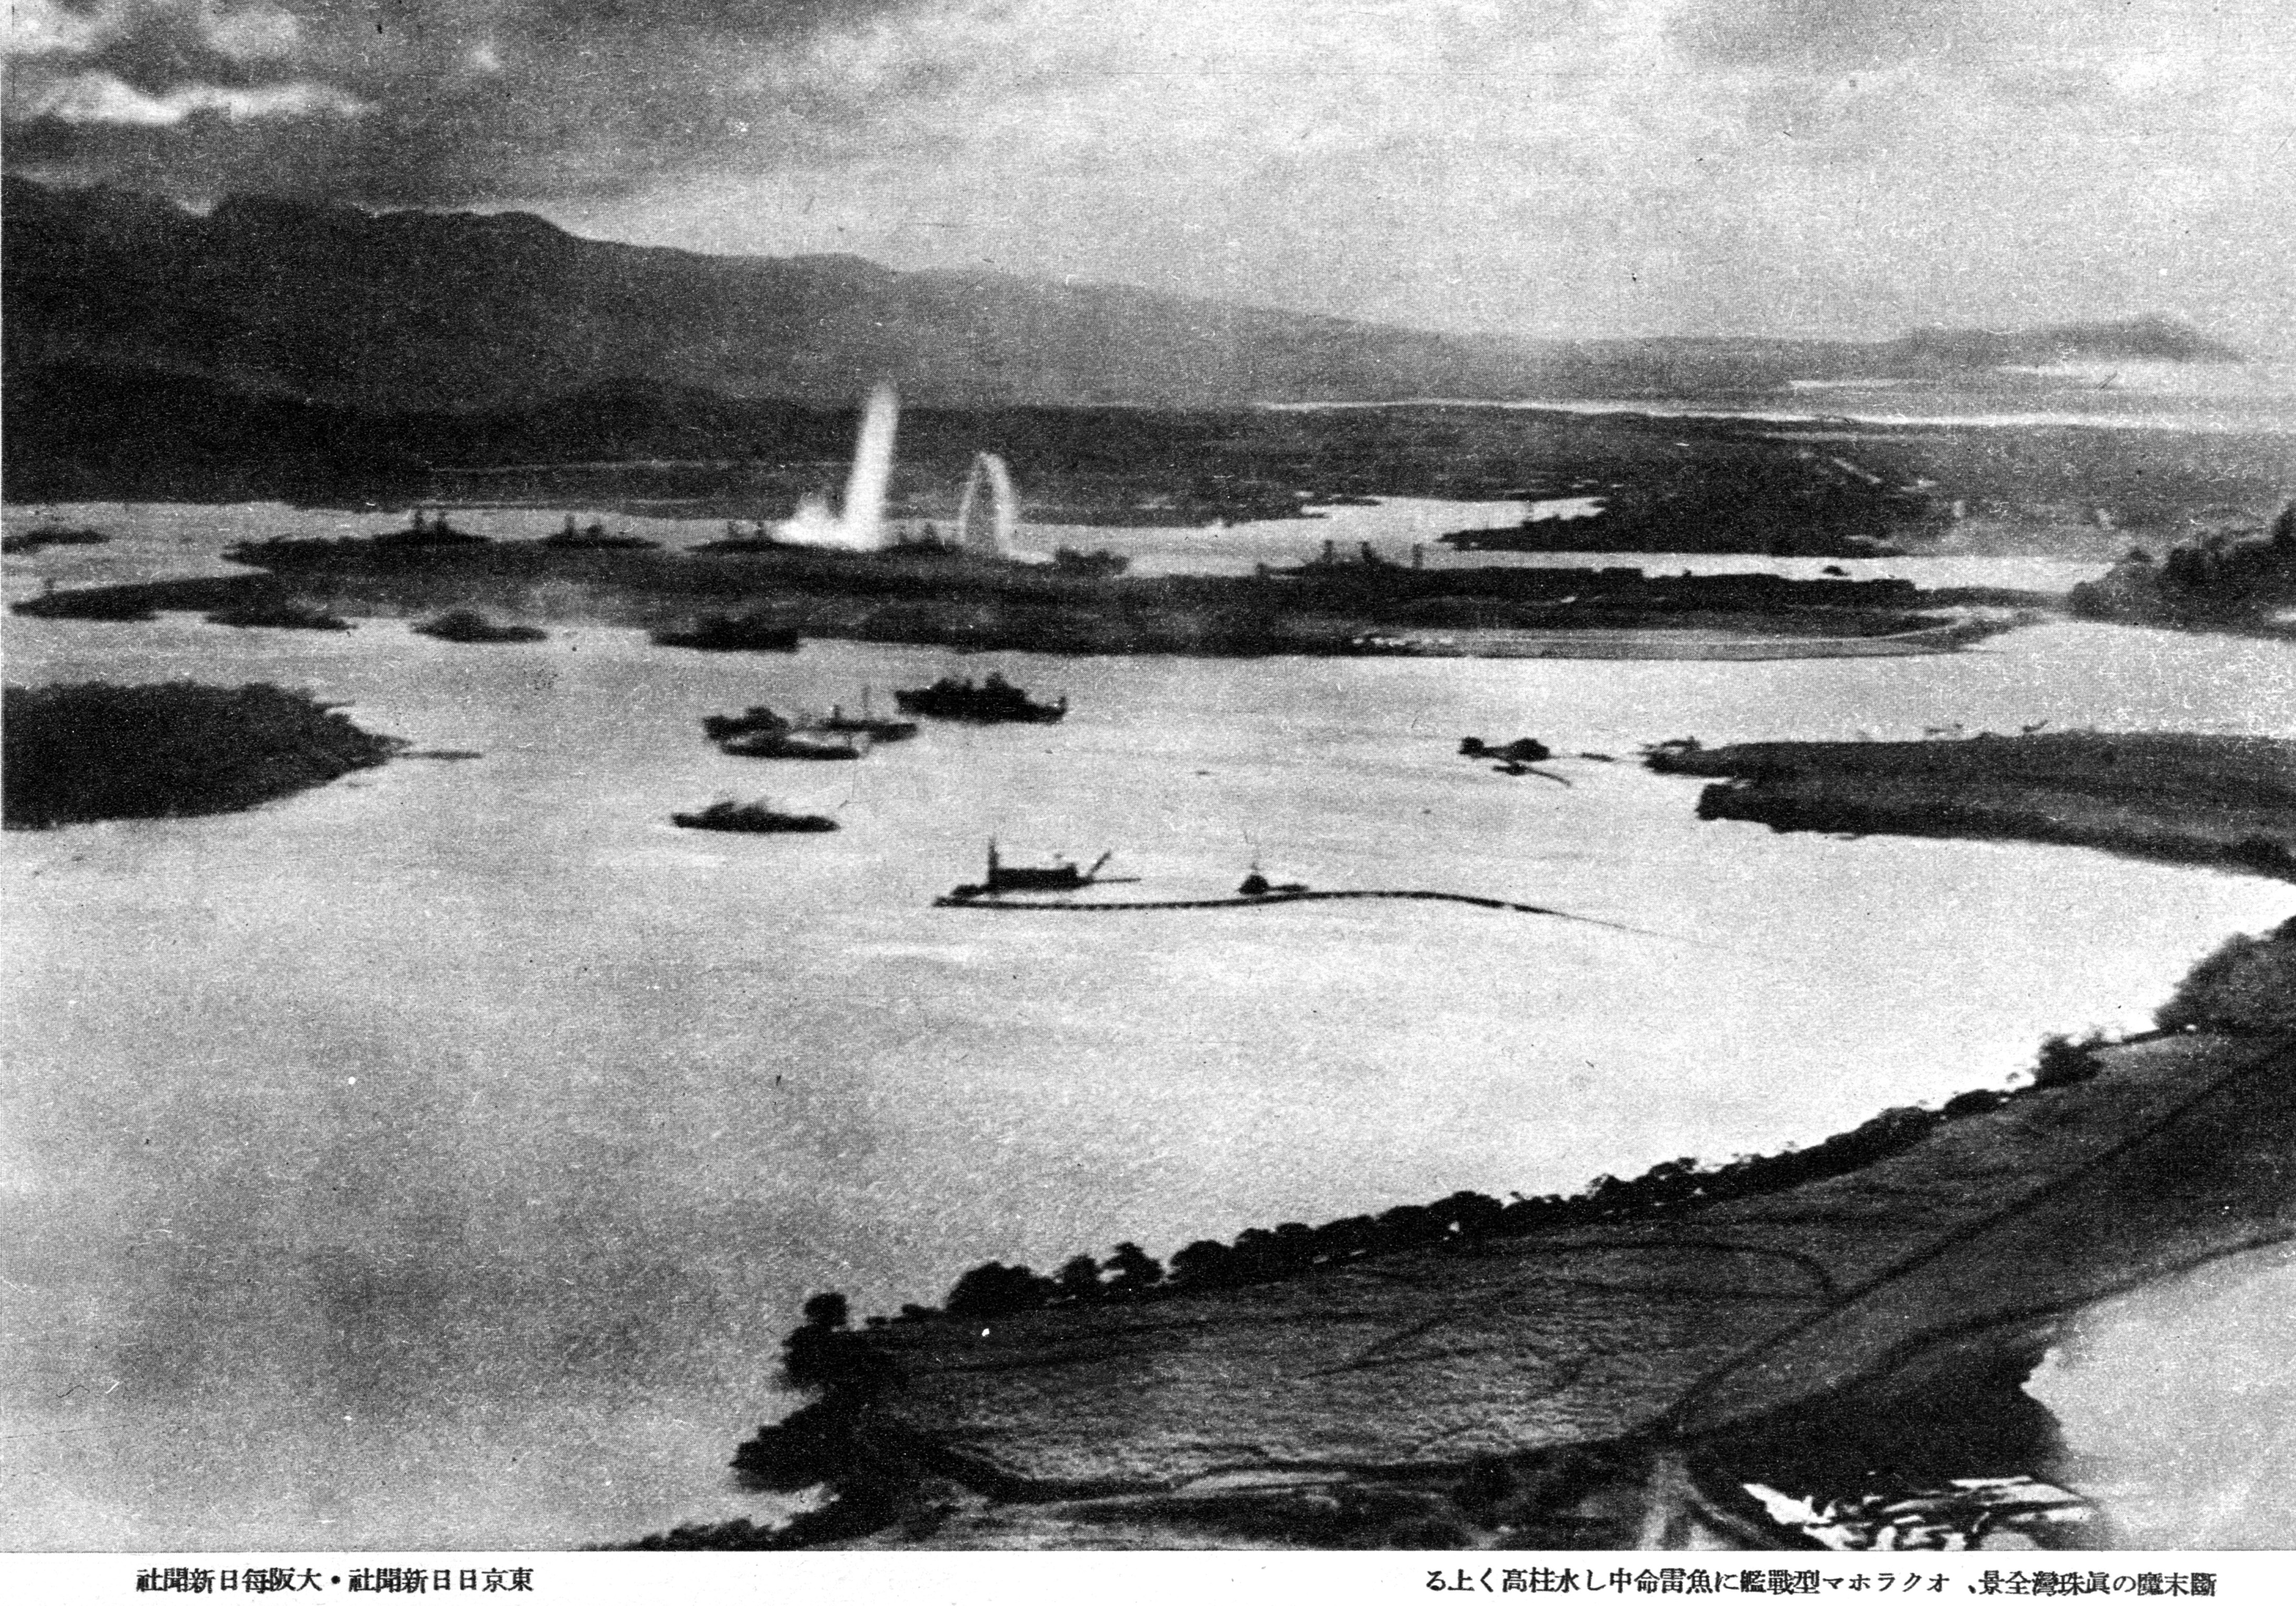 Japanese aerial photo of Pearl Harbor, Hawaii during the attack on 7 Dec 1941. Note torpedo plumes rising from the battleships West Virginia and Oklahoma and smoke rising from the Ford Island seaplane base at right.